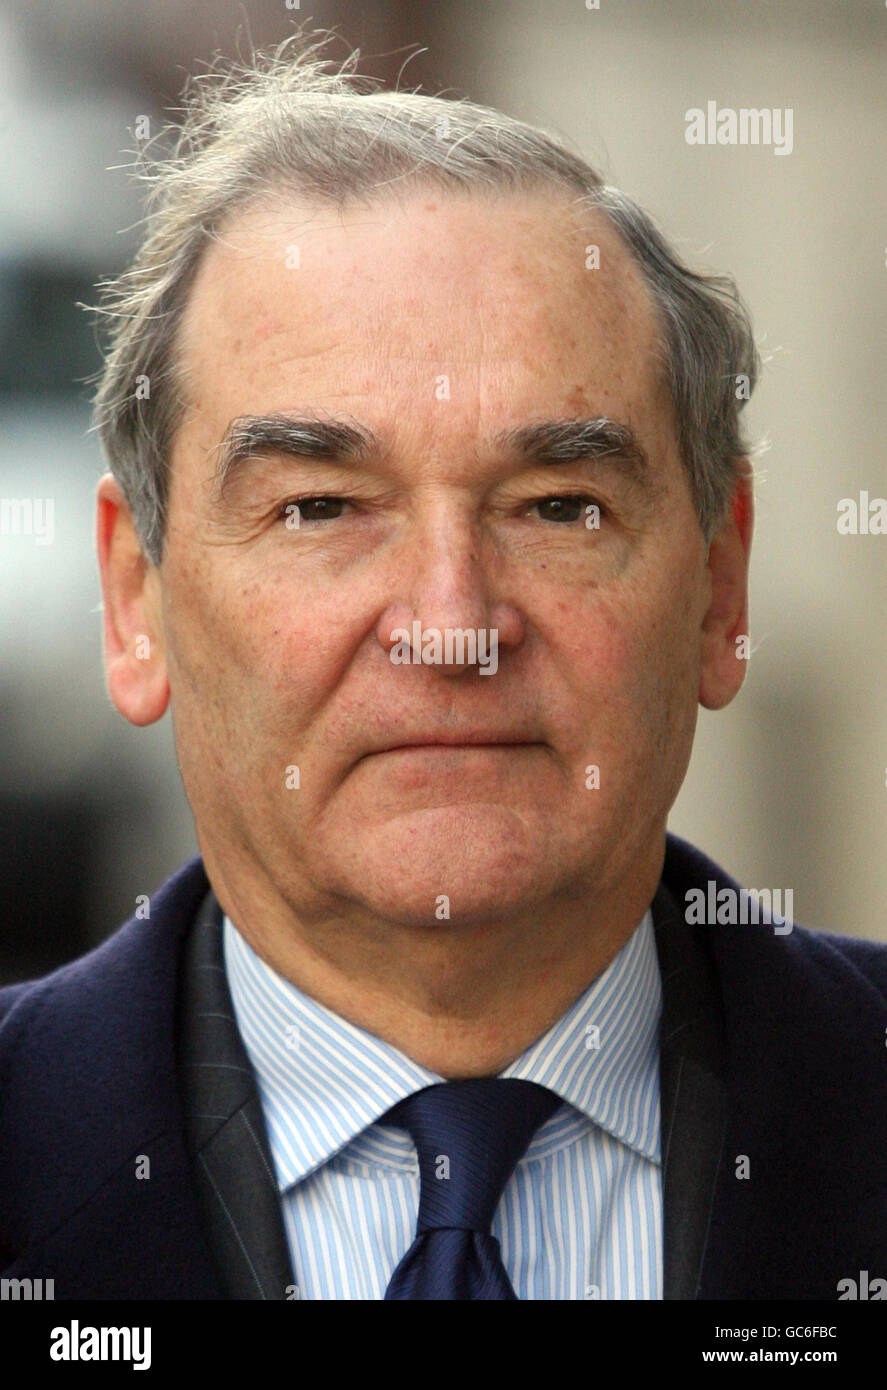 Former British ambassador to the United Nations Sir Jeremy Greenstock leaves the Queen Elizabeth II Centre, London, after giving evidence to the Iraq inquiry. Stock Photo